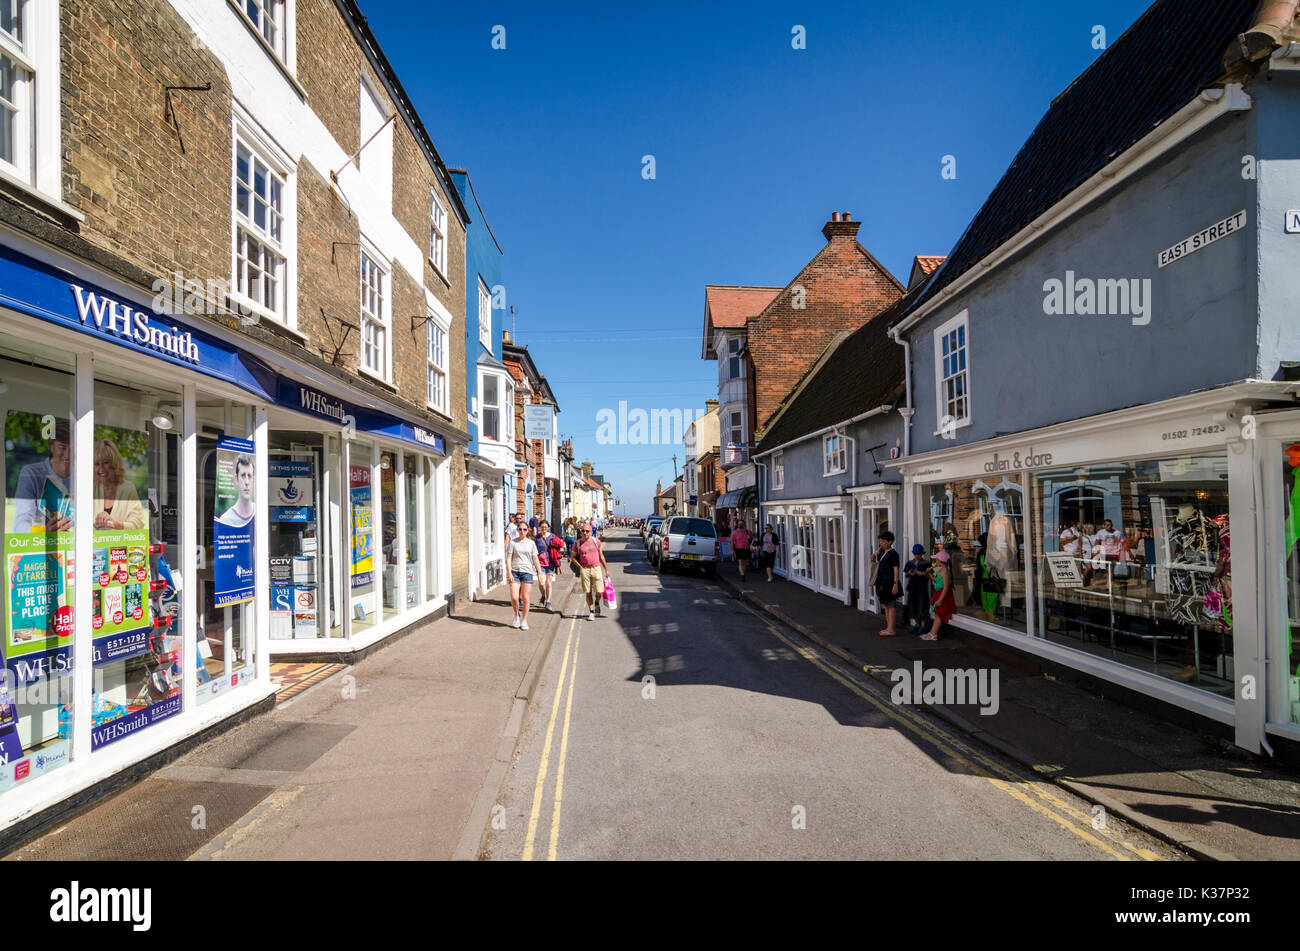 Shops along a street in Southwold, Suffolk, England Stock Photo